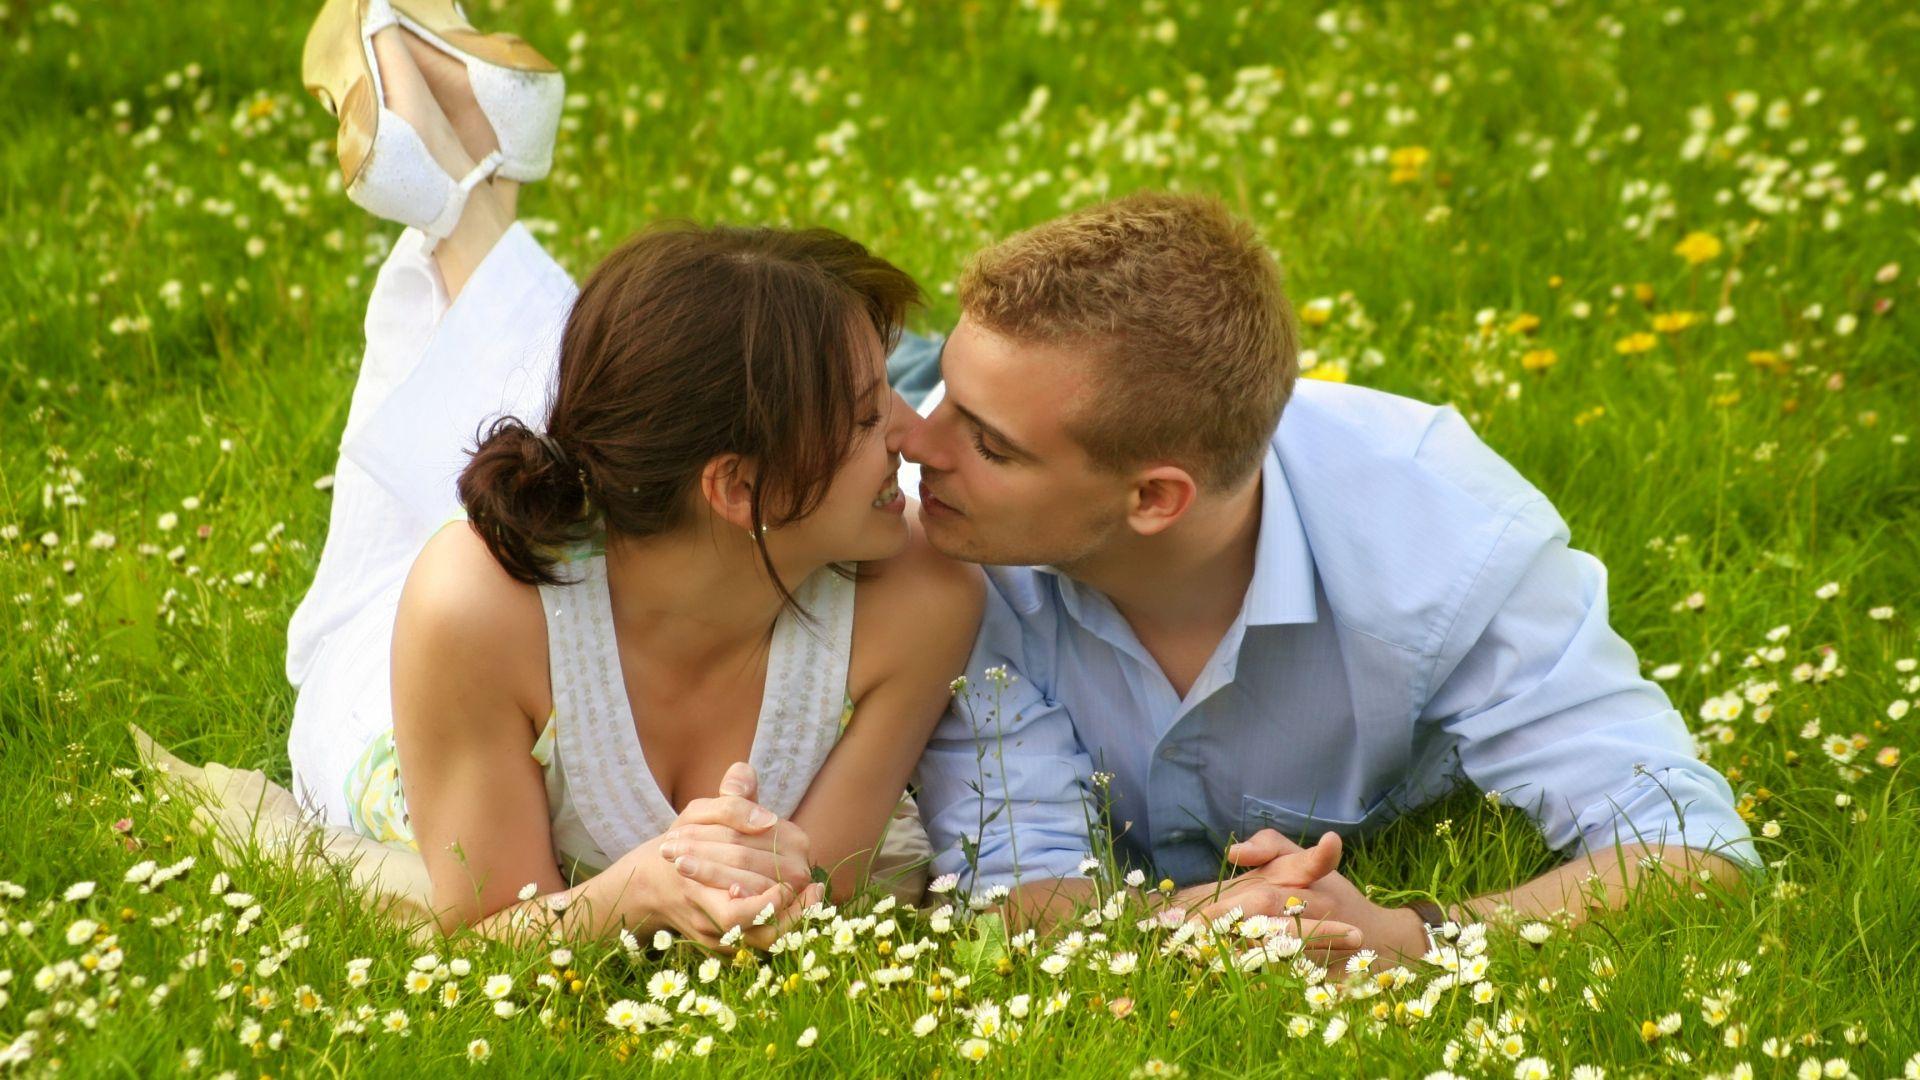 Download Lovers kissing hd wallpaper - Romantic wallpapers for your mobile  cell phone